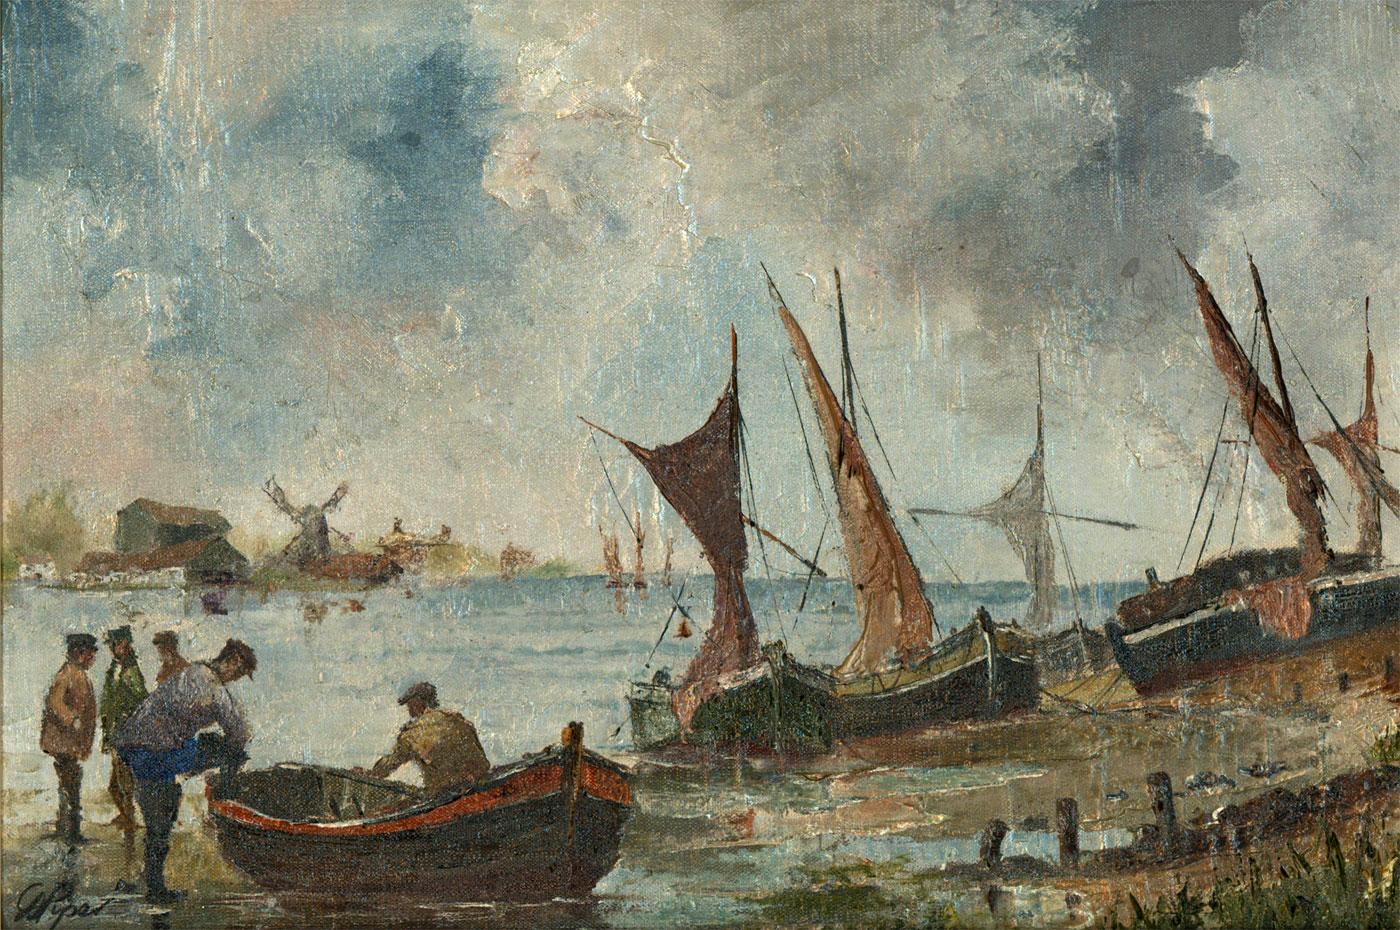 A fine Dutch School watercolour depicting fishermen and boats in a Dutch coastal landscape, with windmill beyond. Framed. Signed. On board.
